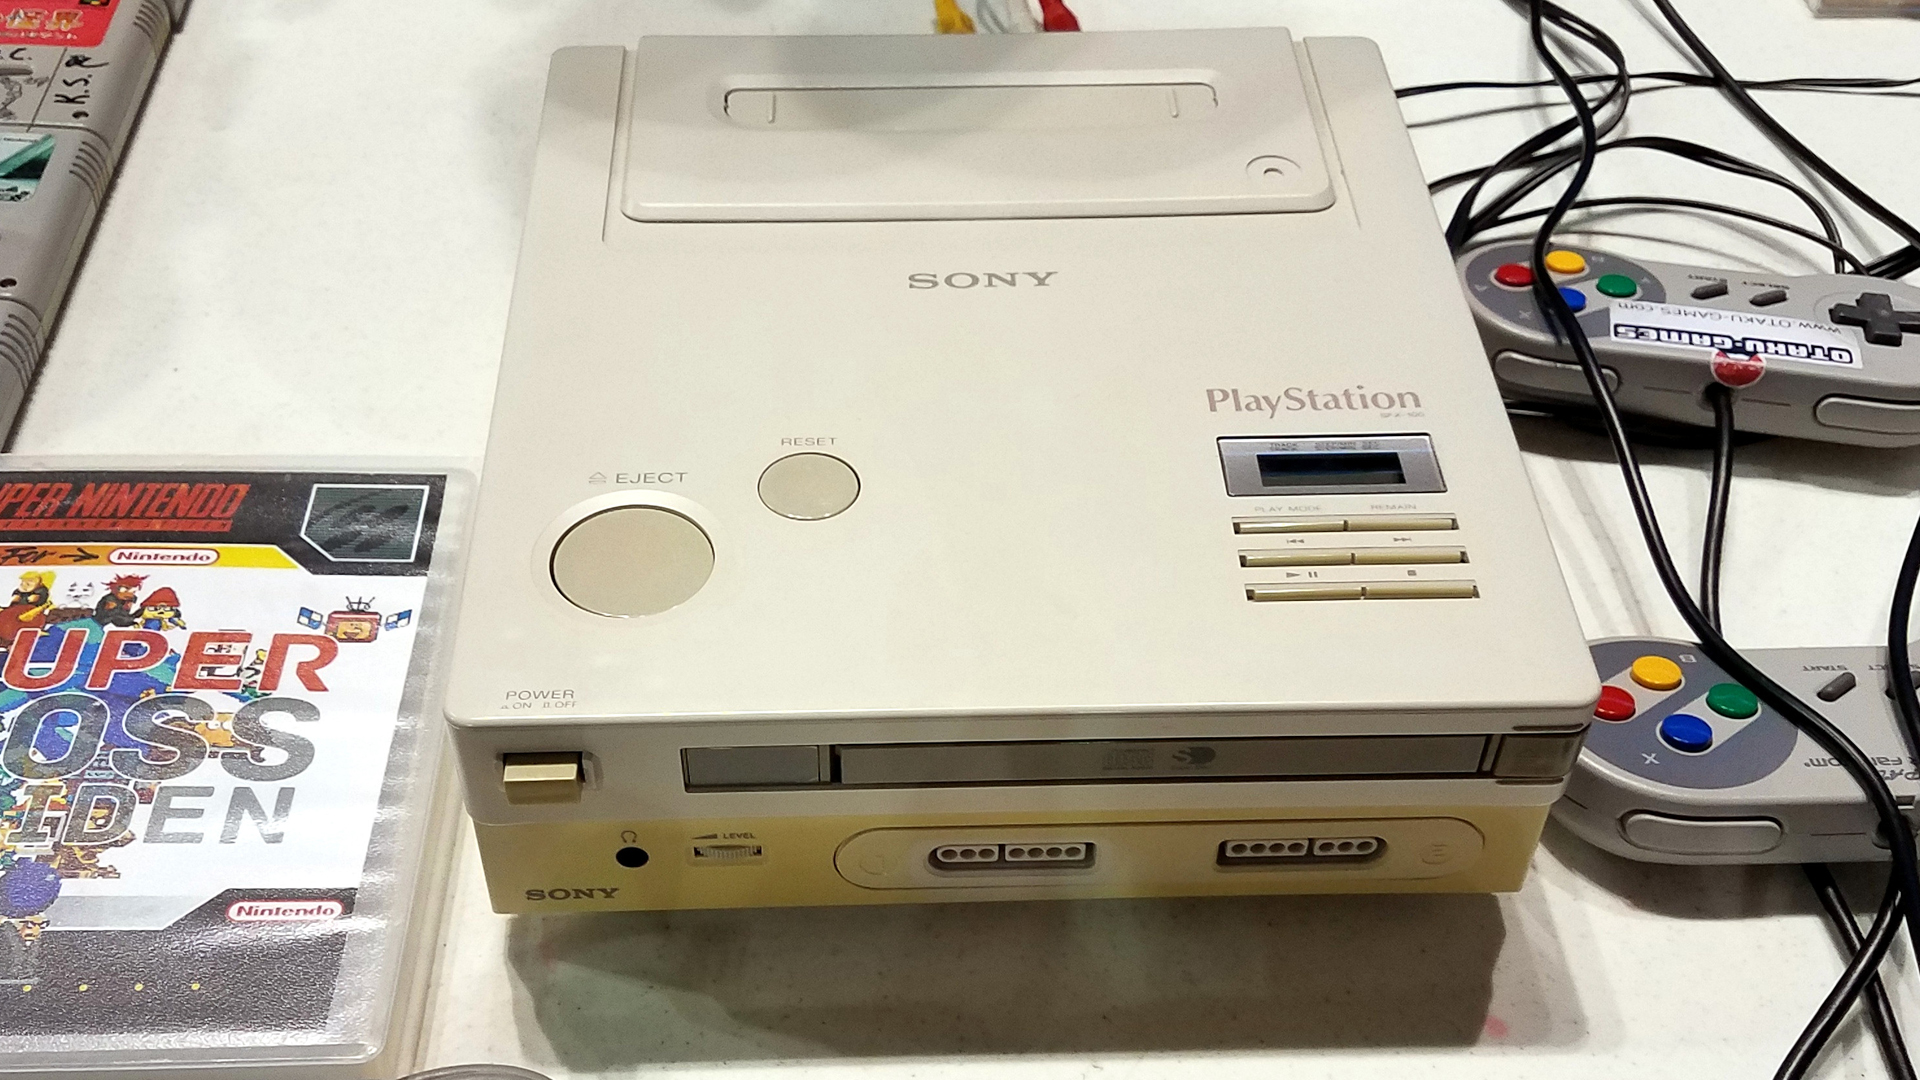 The Literally One-Of-A-Kind Nintendo Playstation Console Has Been Auctioned Off For $360,000